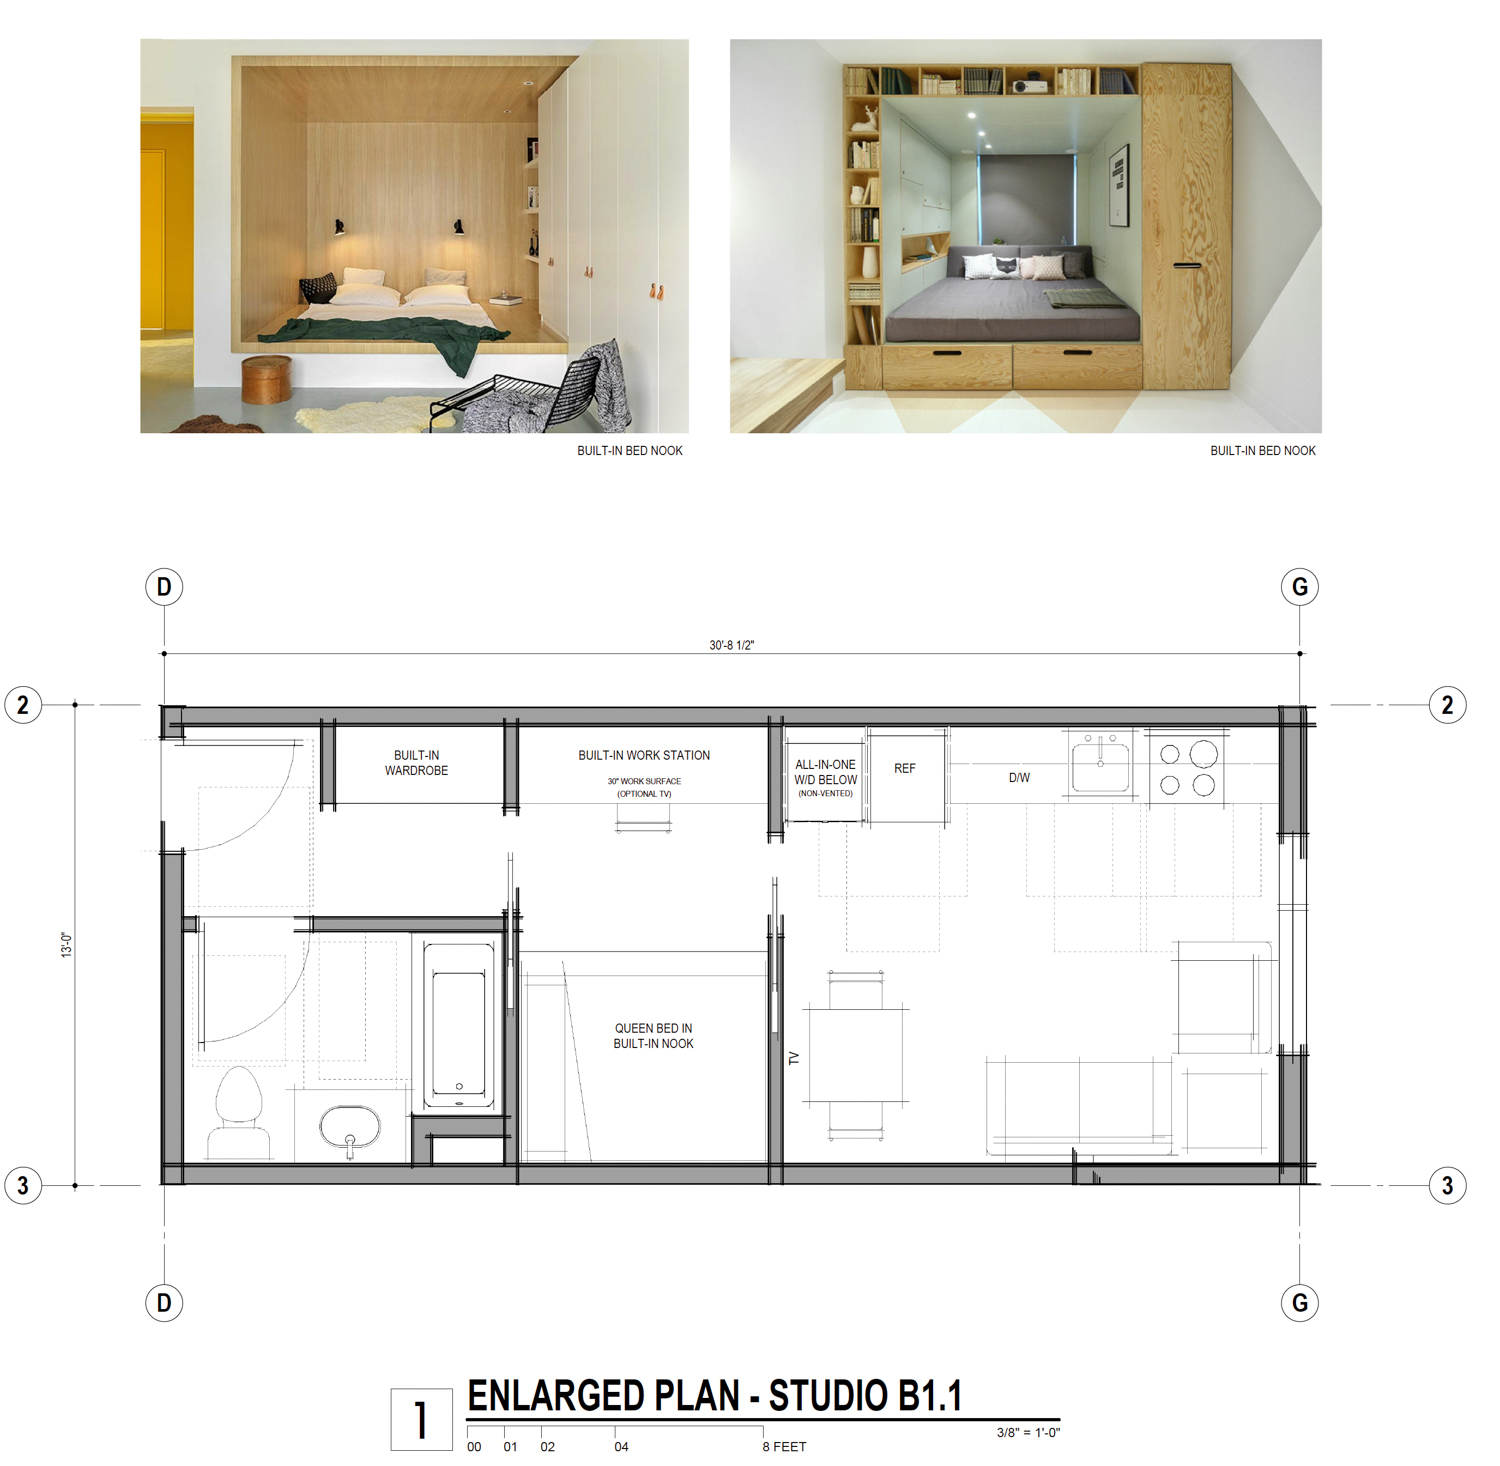 3801 Telegraph Avenue interior design floor plan and images of inspiration bed nook, illustration by Left Coast Architecture